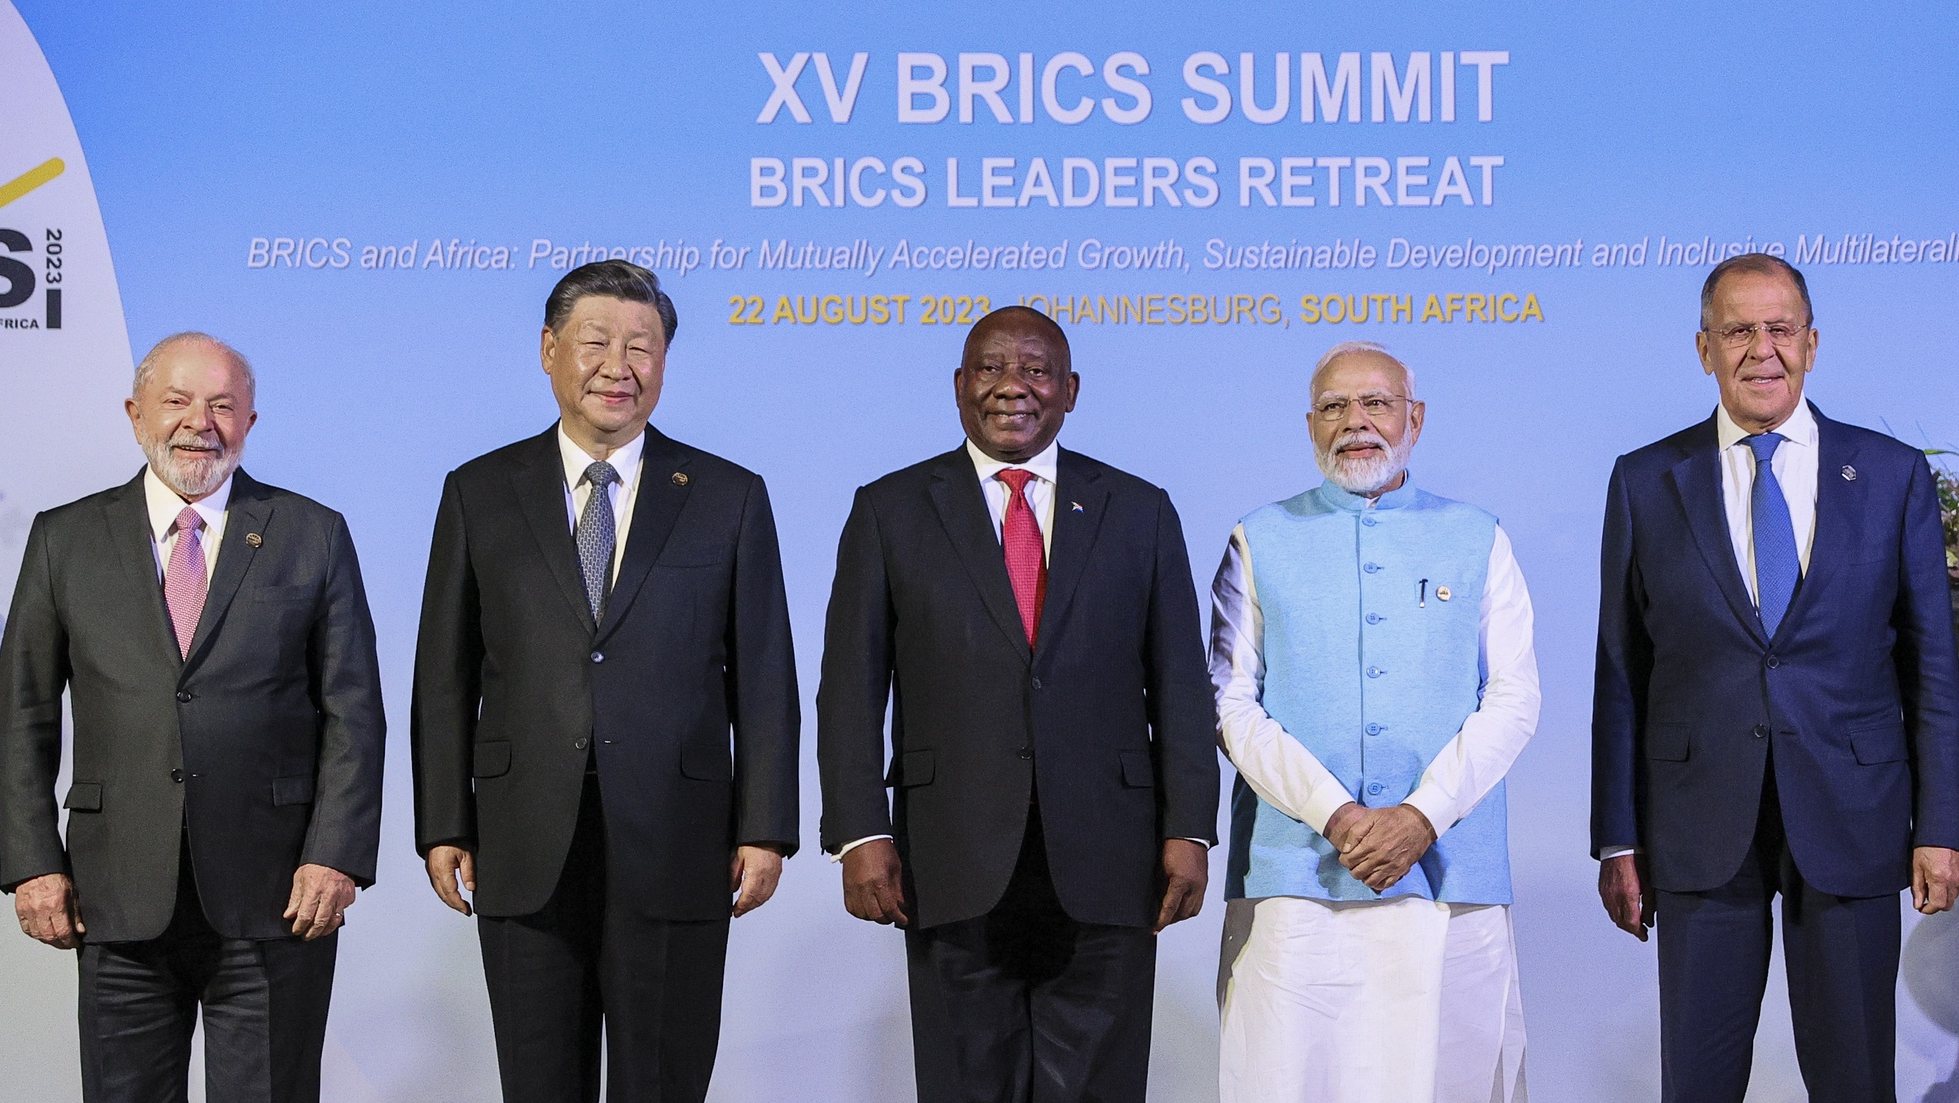 epa10814788 A handout photo made available by Russian Foreign Ministry Press Service shows (L-R) Brazilian President Luiz Inacio Lula da Silva, Chinese President Xi Jinping, South African President Cyril Ramaphosa, Indian Prime Minister Narendra Modi and Russian Foreign Minister Sergey Lavrov posing for a group photograph during the 15th BRICS Summit, in Johannesburg, South Africa, 22 August 2023. South Africa is hosting the 15th BRICS Summit, (Brazil, Russia, India, China and South Africa), as the groupâ€™s economies account for a quarter of global gross domestic product. Dozens of leaders of other countries in Africa, Asia and the Middle East are also attending the summit.  EPA/RUSSIAN FOREIGN MINISTRY PRESS SERVICE / HANDOUT  HANDOUT EDITORIAL USE ONLY/NO SALES